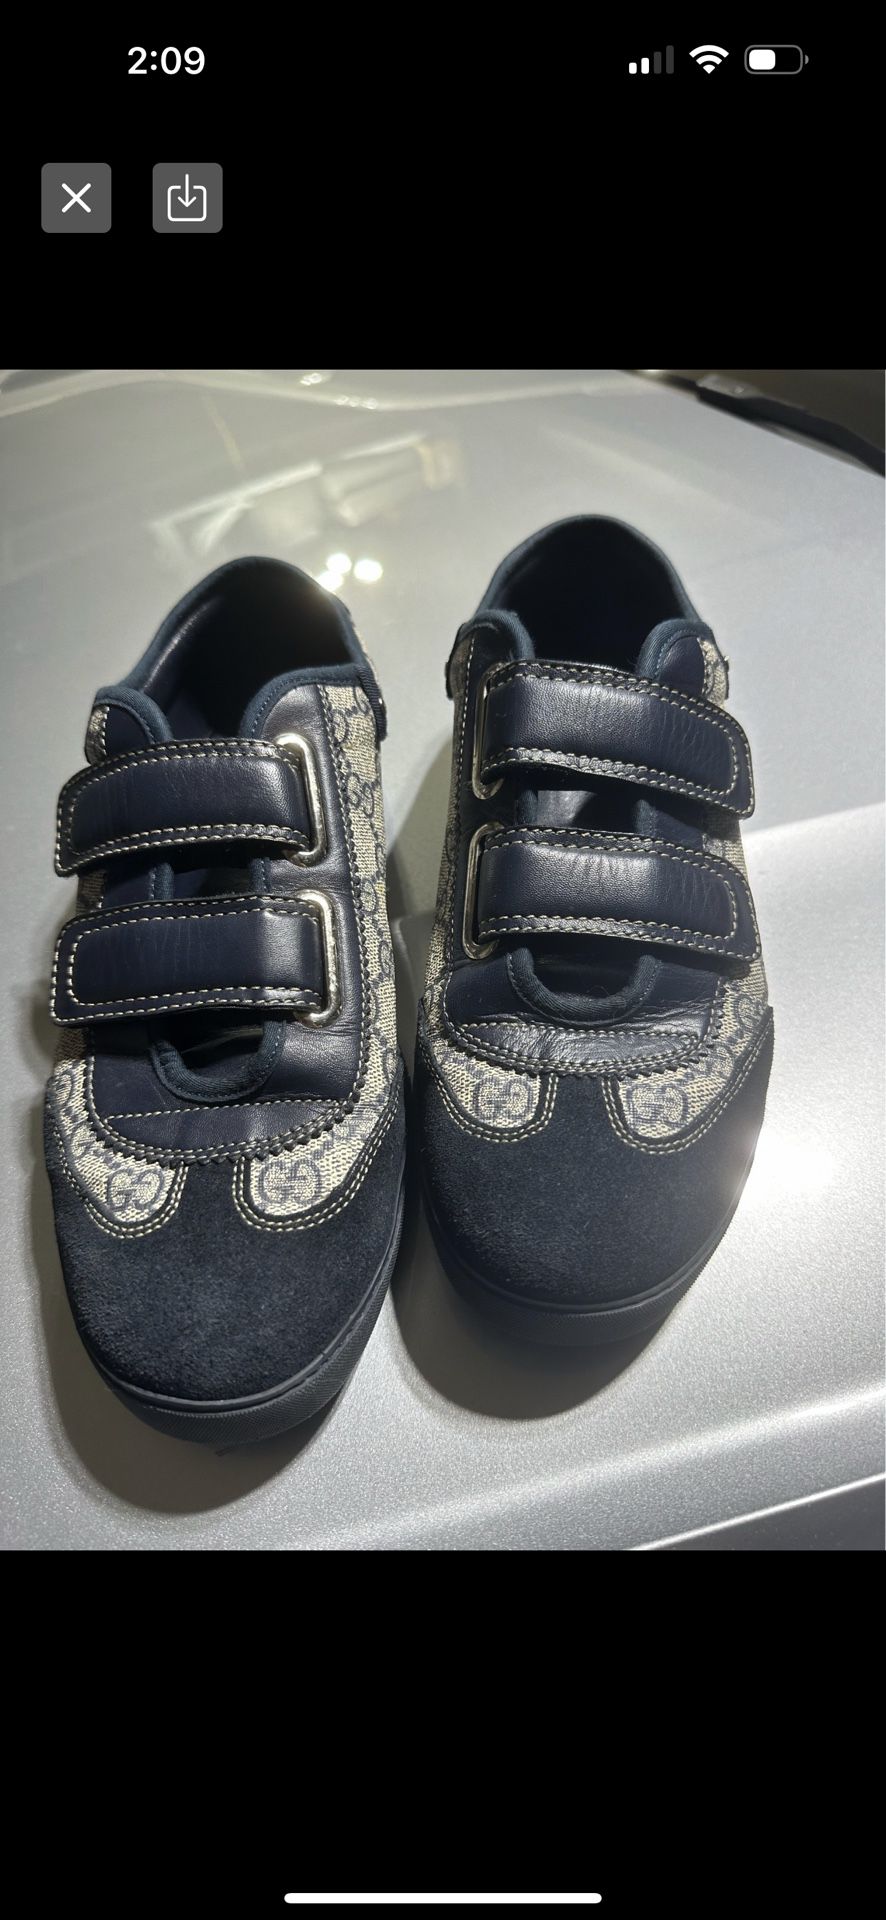 Authentic Gucci Loafers, US 8.5